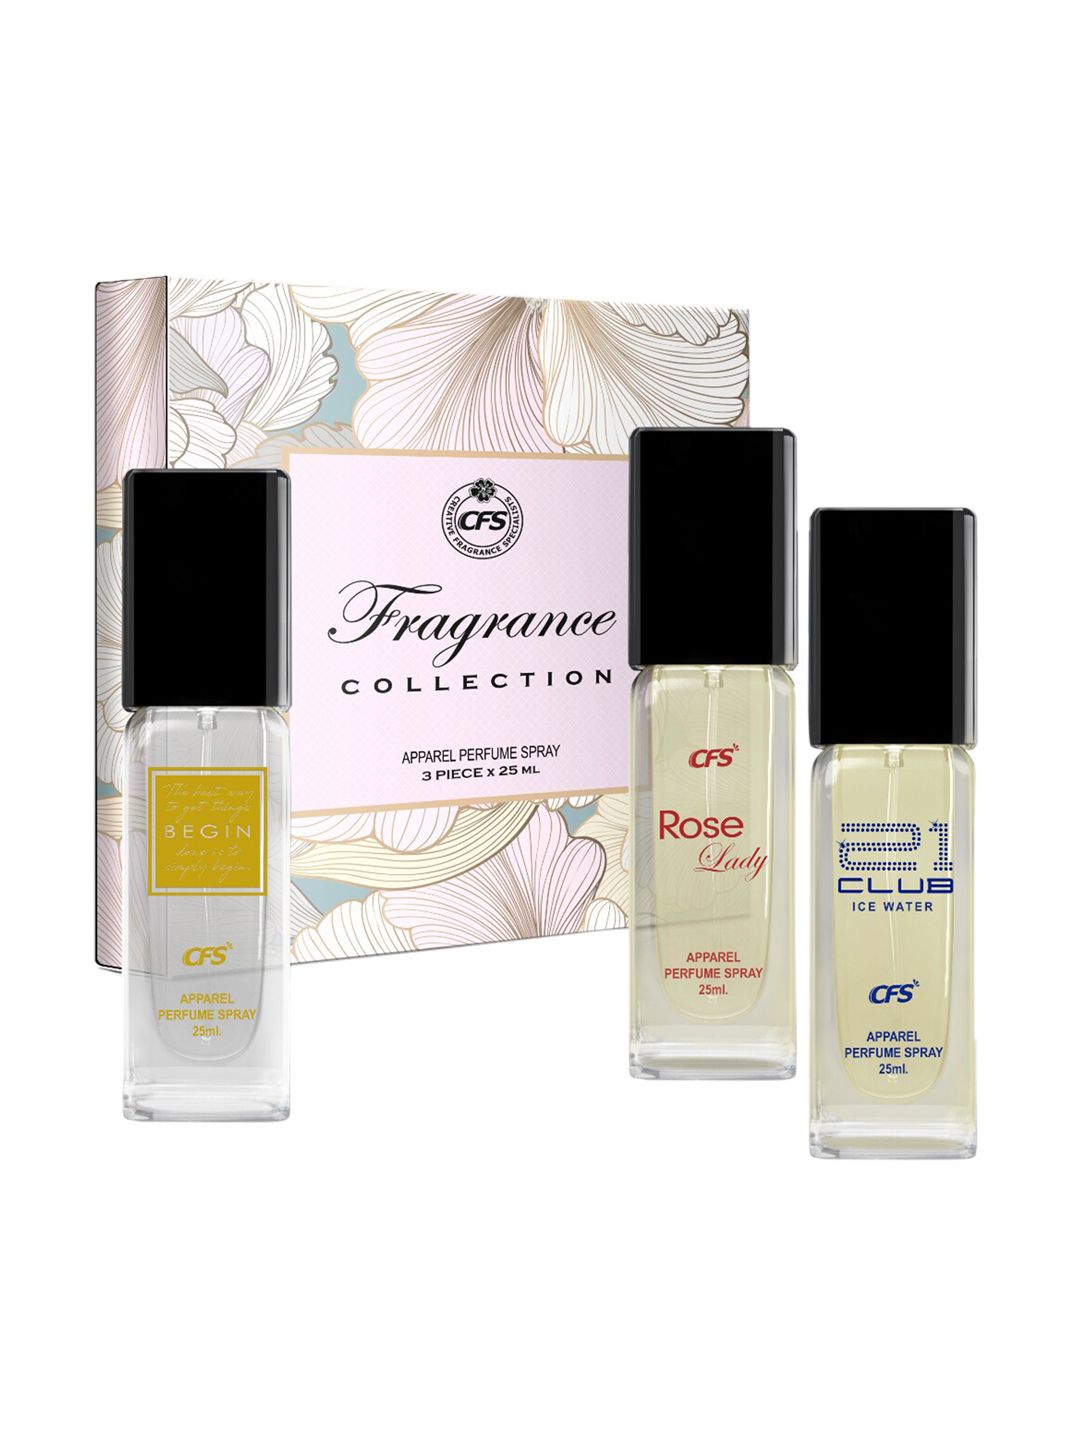 CFS Fragrance Collection Perfume Set - Begin + Rose Lady + 21 Club Ice Water - 25 ml Each Price in India